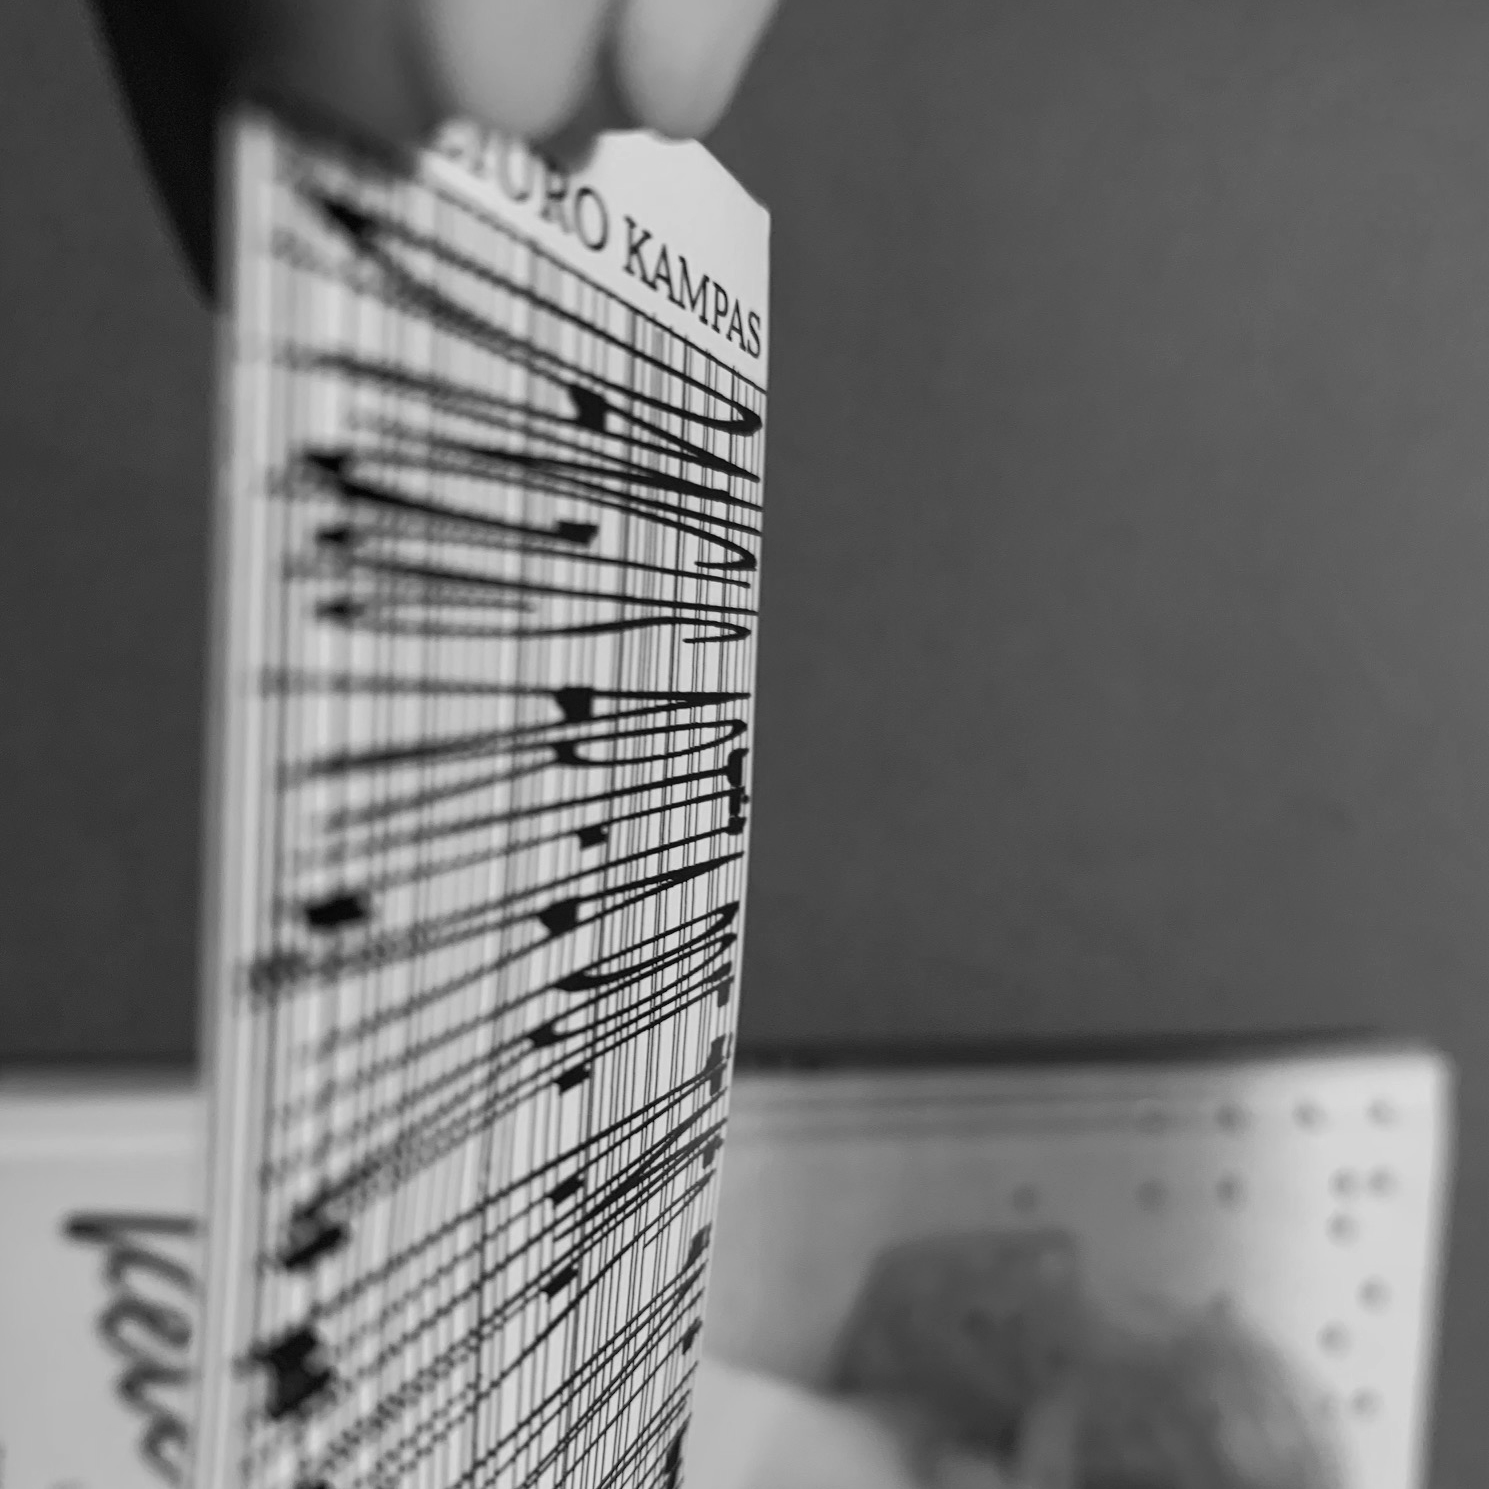 Foto of a book from the side.